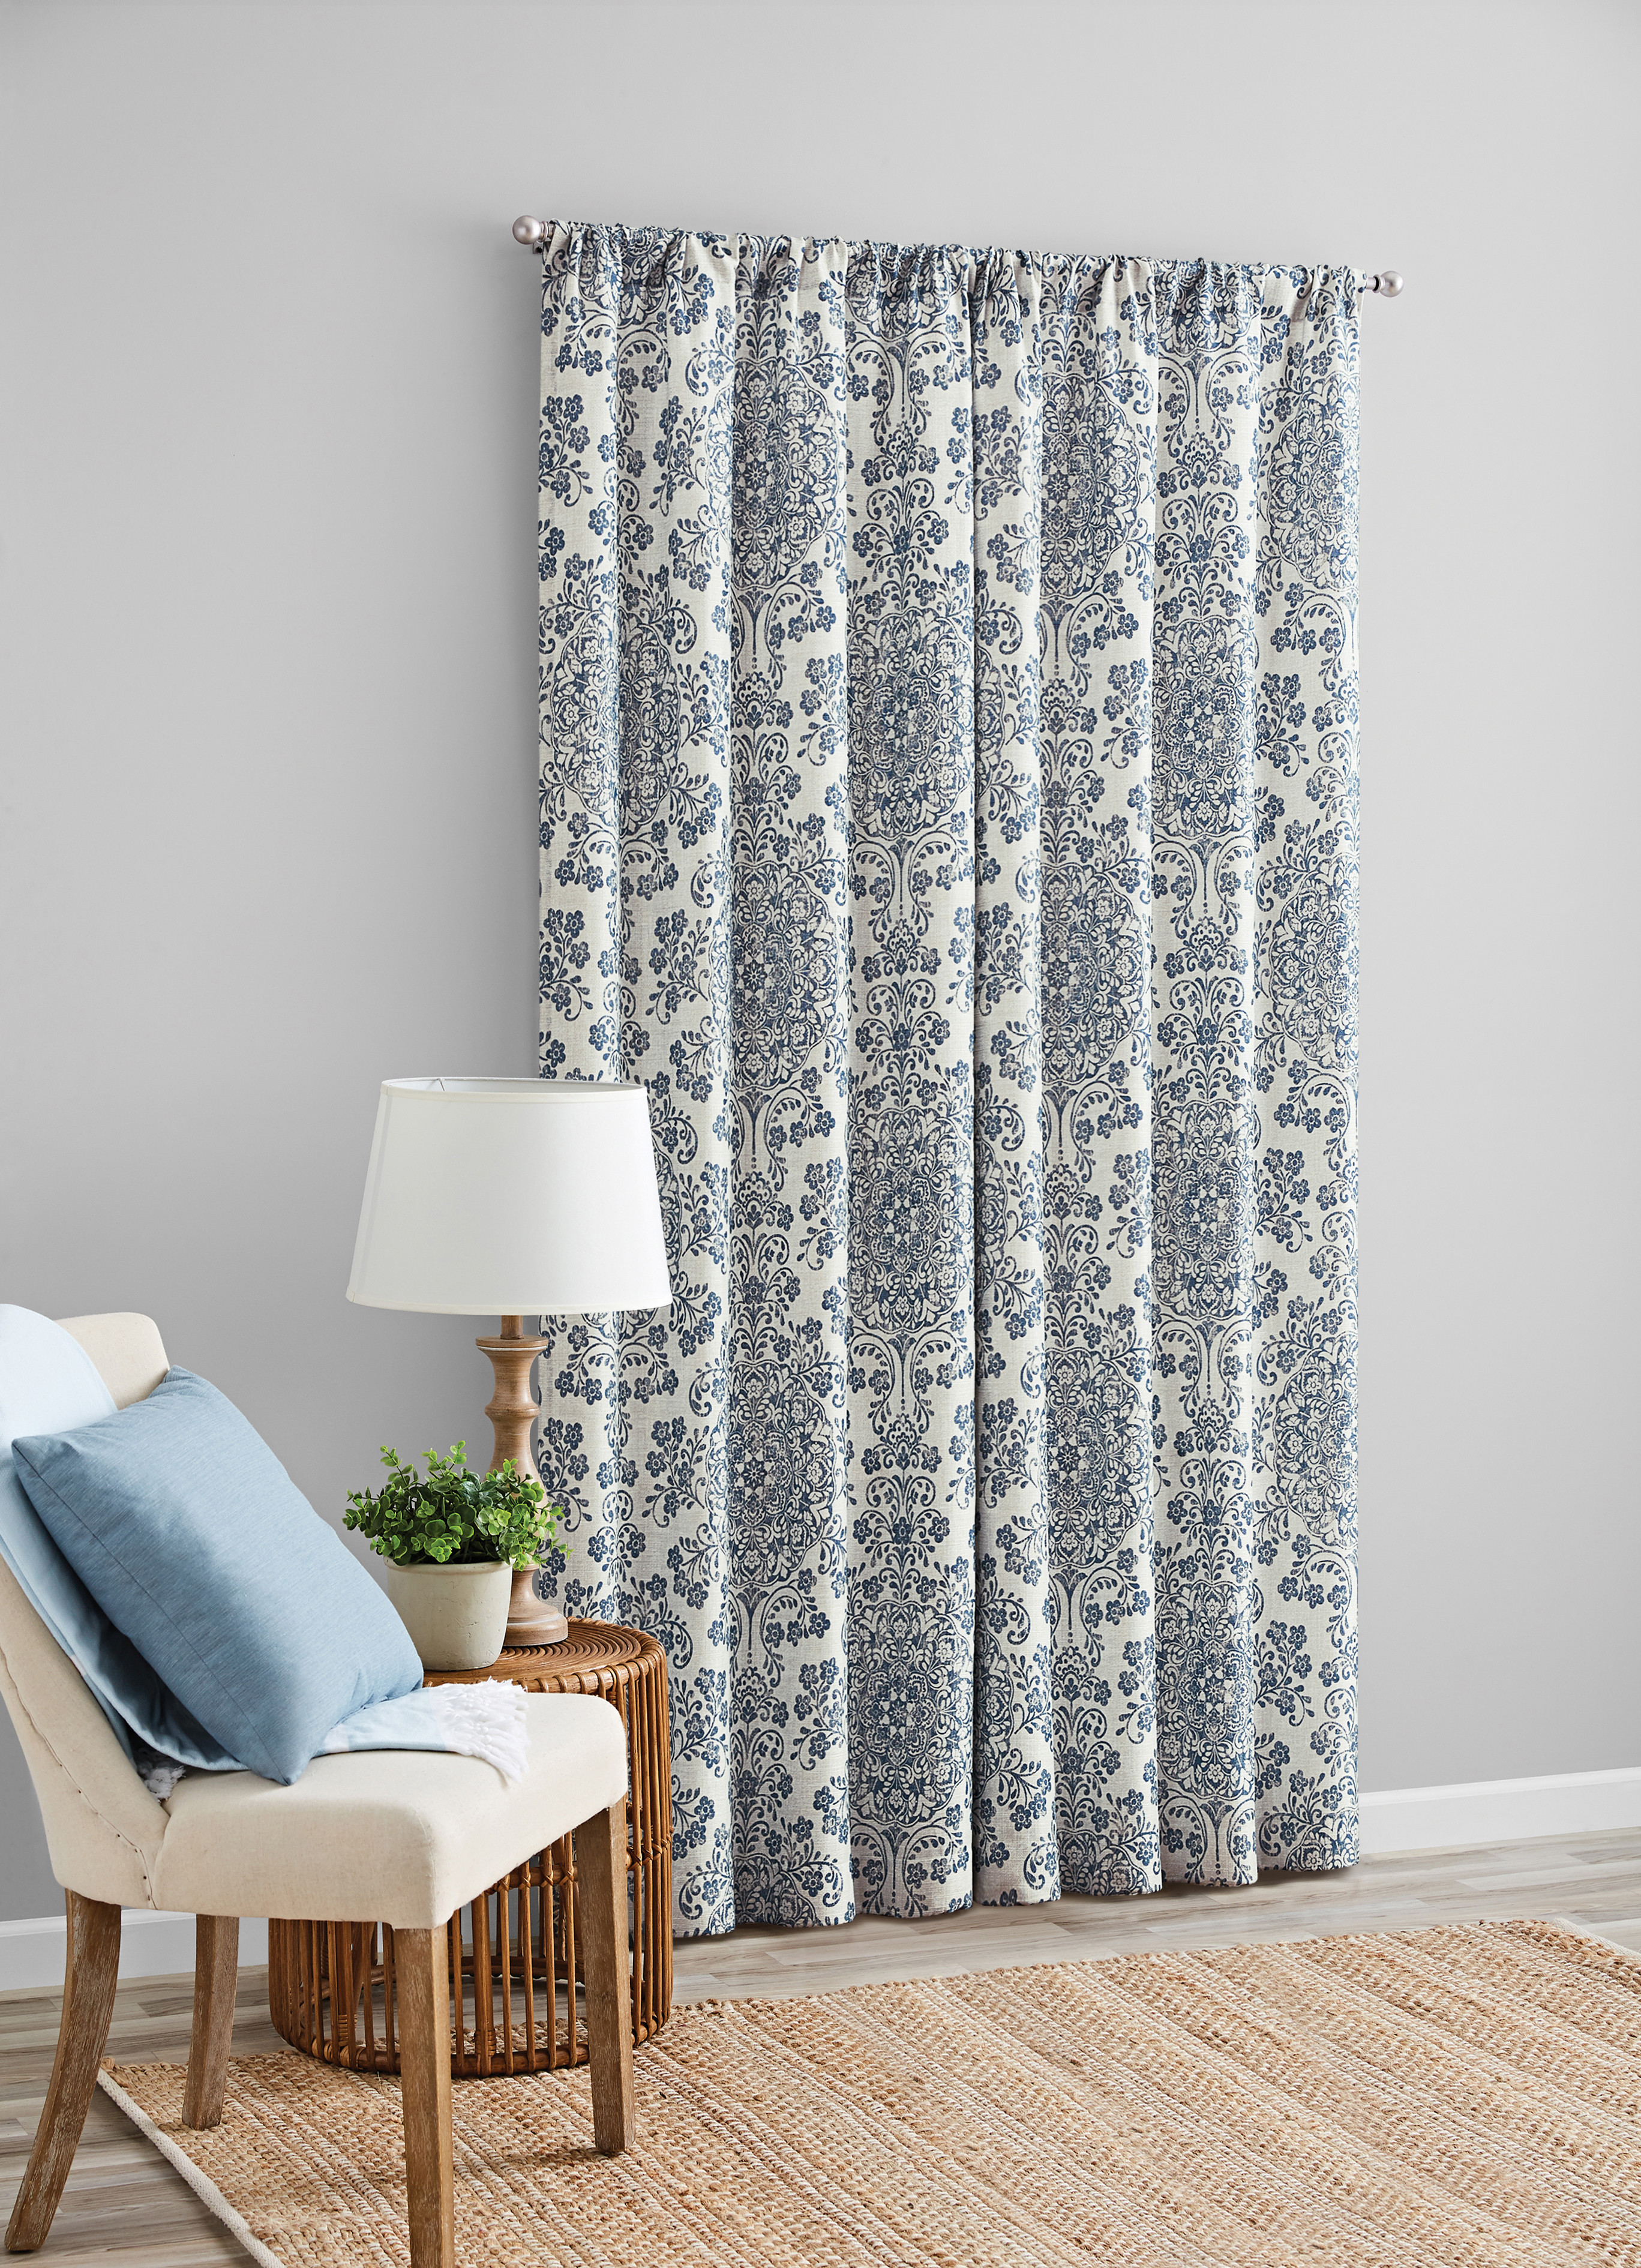 Mainstays Southport Damask Print Light Filtering Rod Pocket Curtain Panel Pair, Set of 2, Blue, 40 x 84 - image 3 of 7